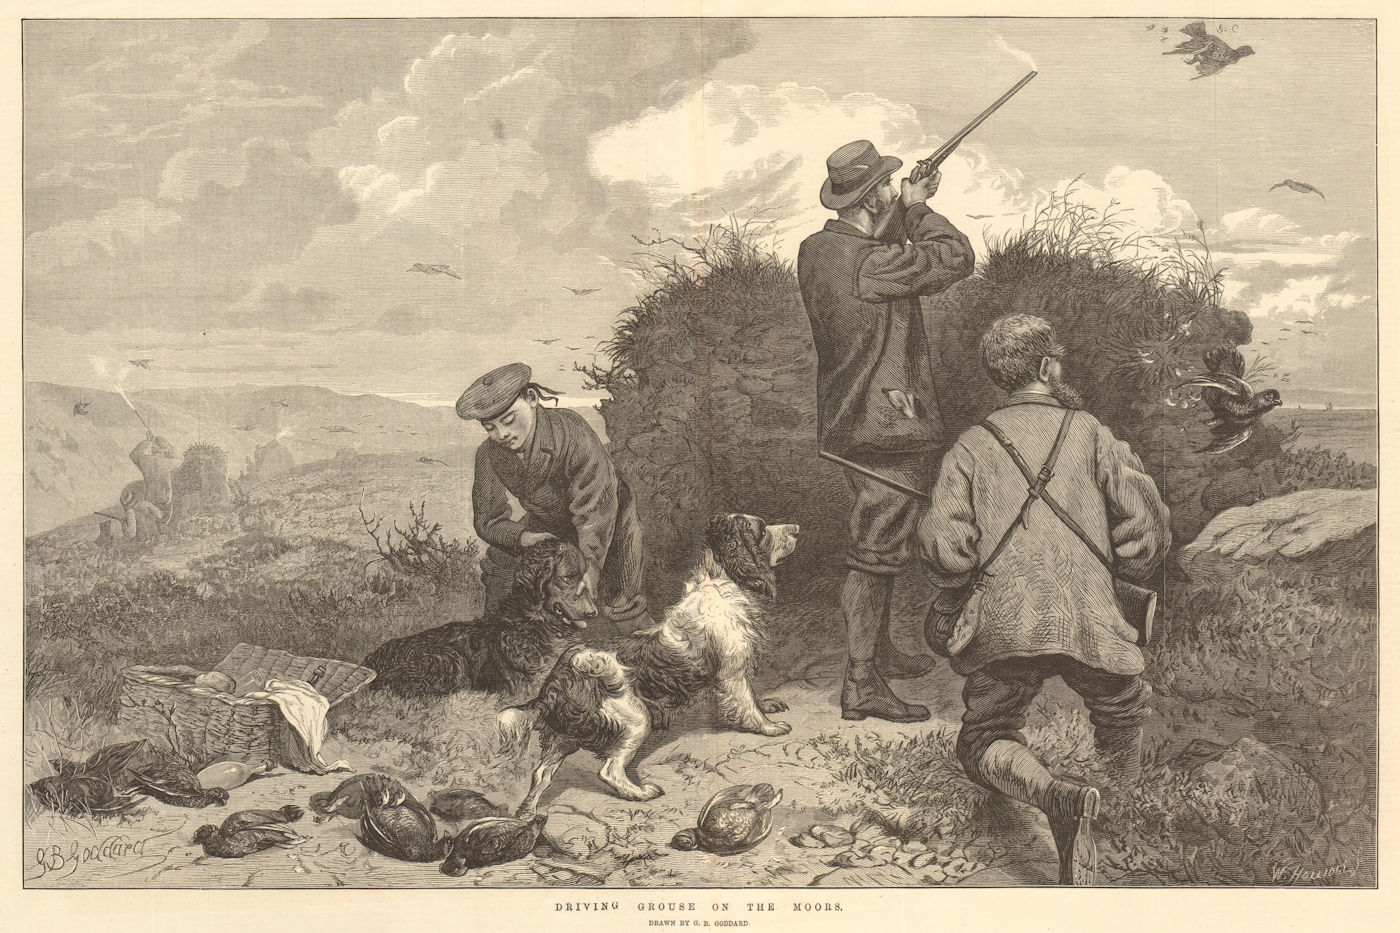 Driving grouse on the moors. Drawn by G. B. Goddard. Hunting 1876 old print